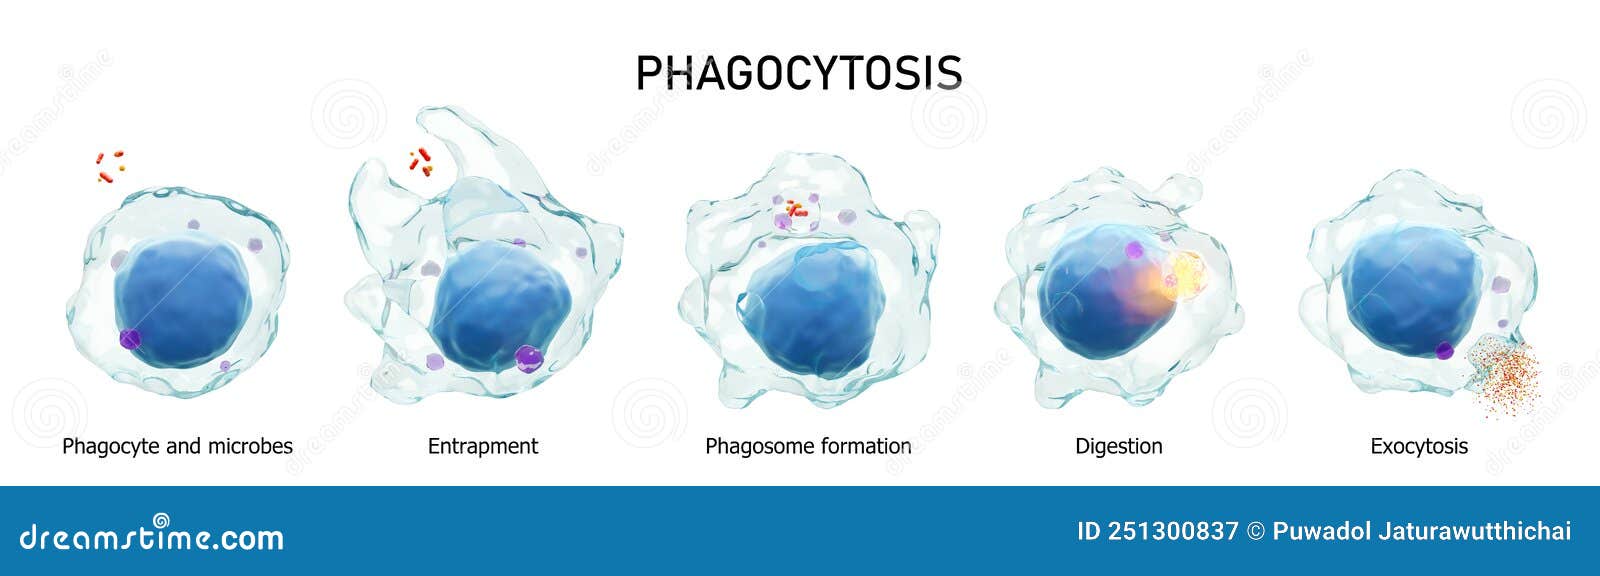 phagocytosis . step by step process of macrophage is swallowing and killing microbes .  white background . medical